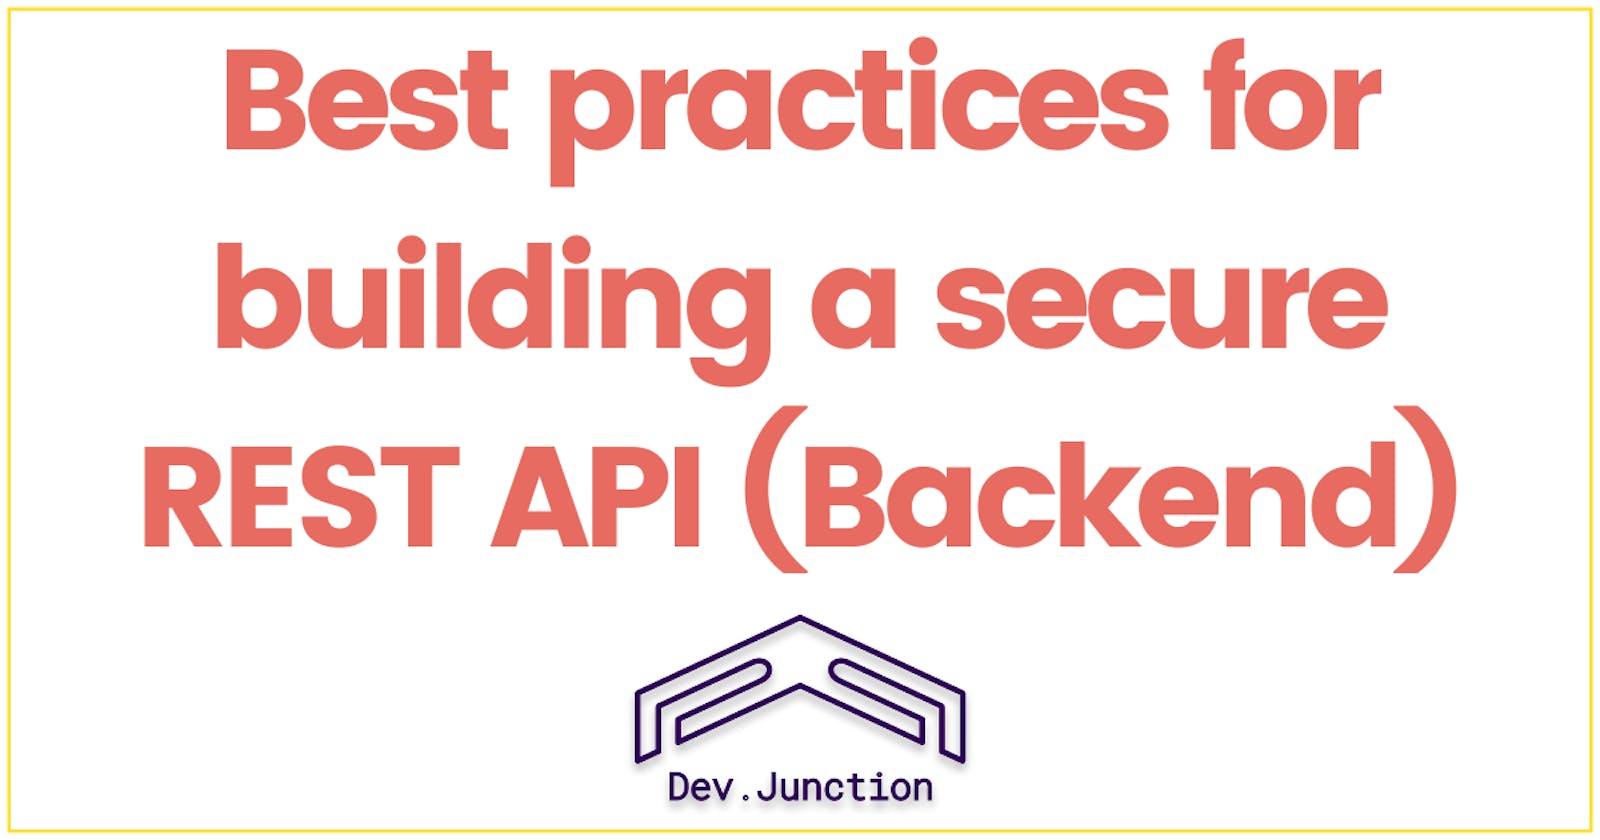 Best practices you should follow for building a secure REST API (Backend)